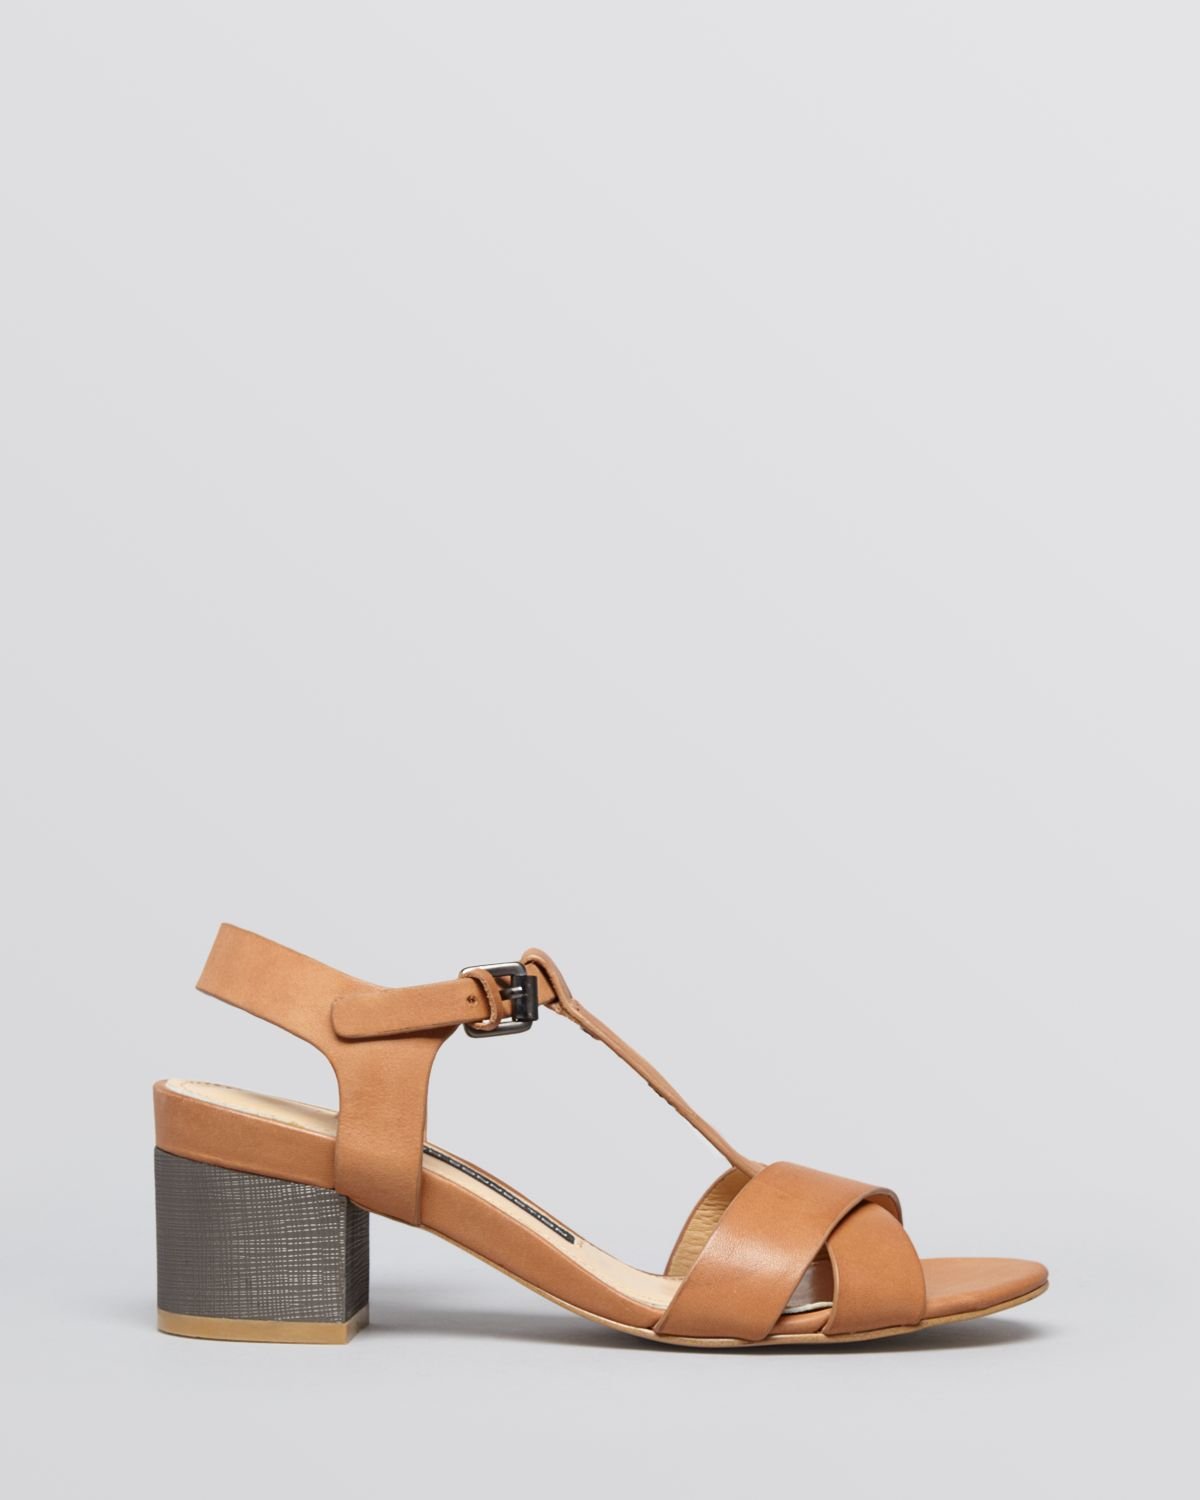 French Connection Open Toe City Sandals Lara Block Heel in Brown (Tan ...